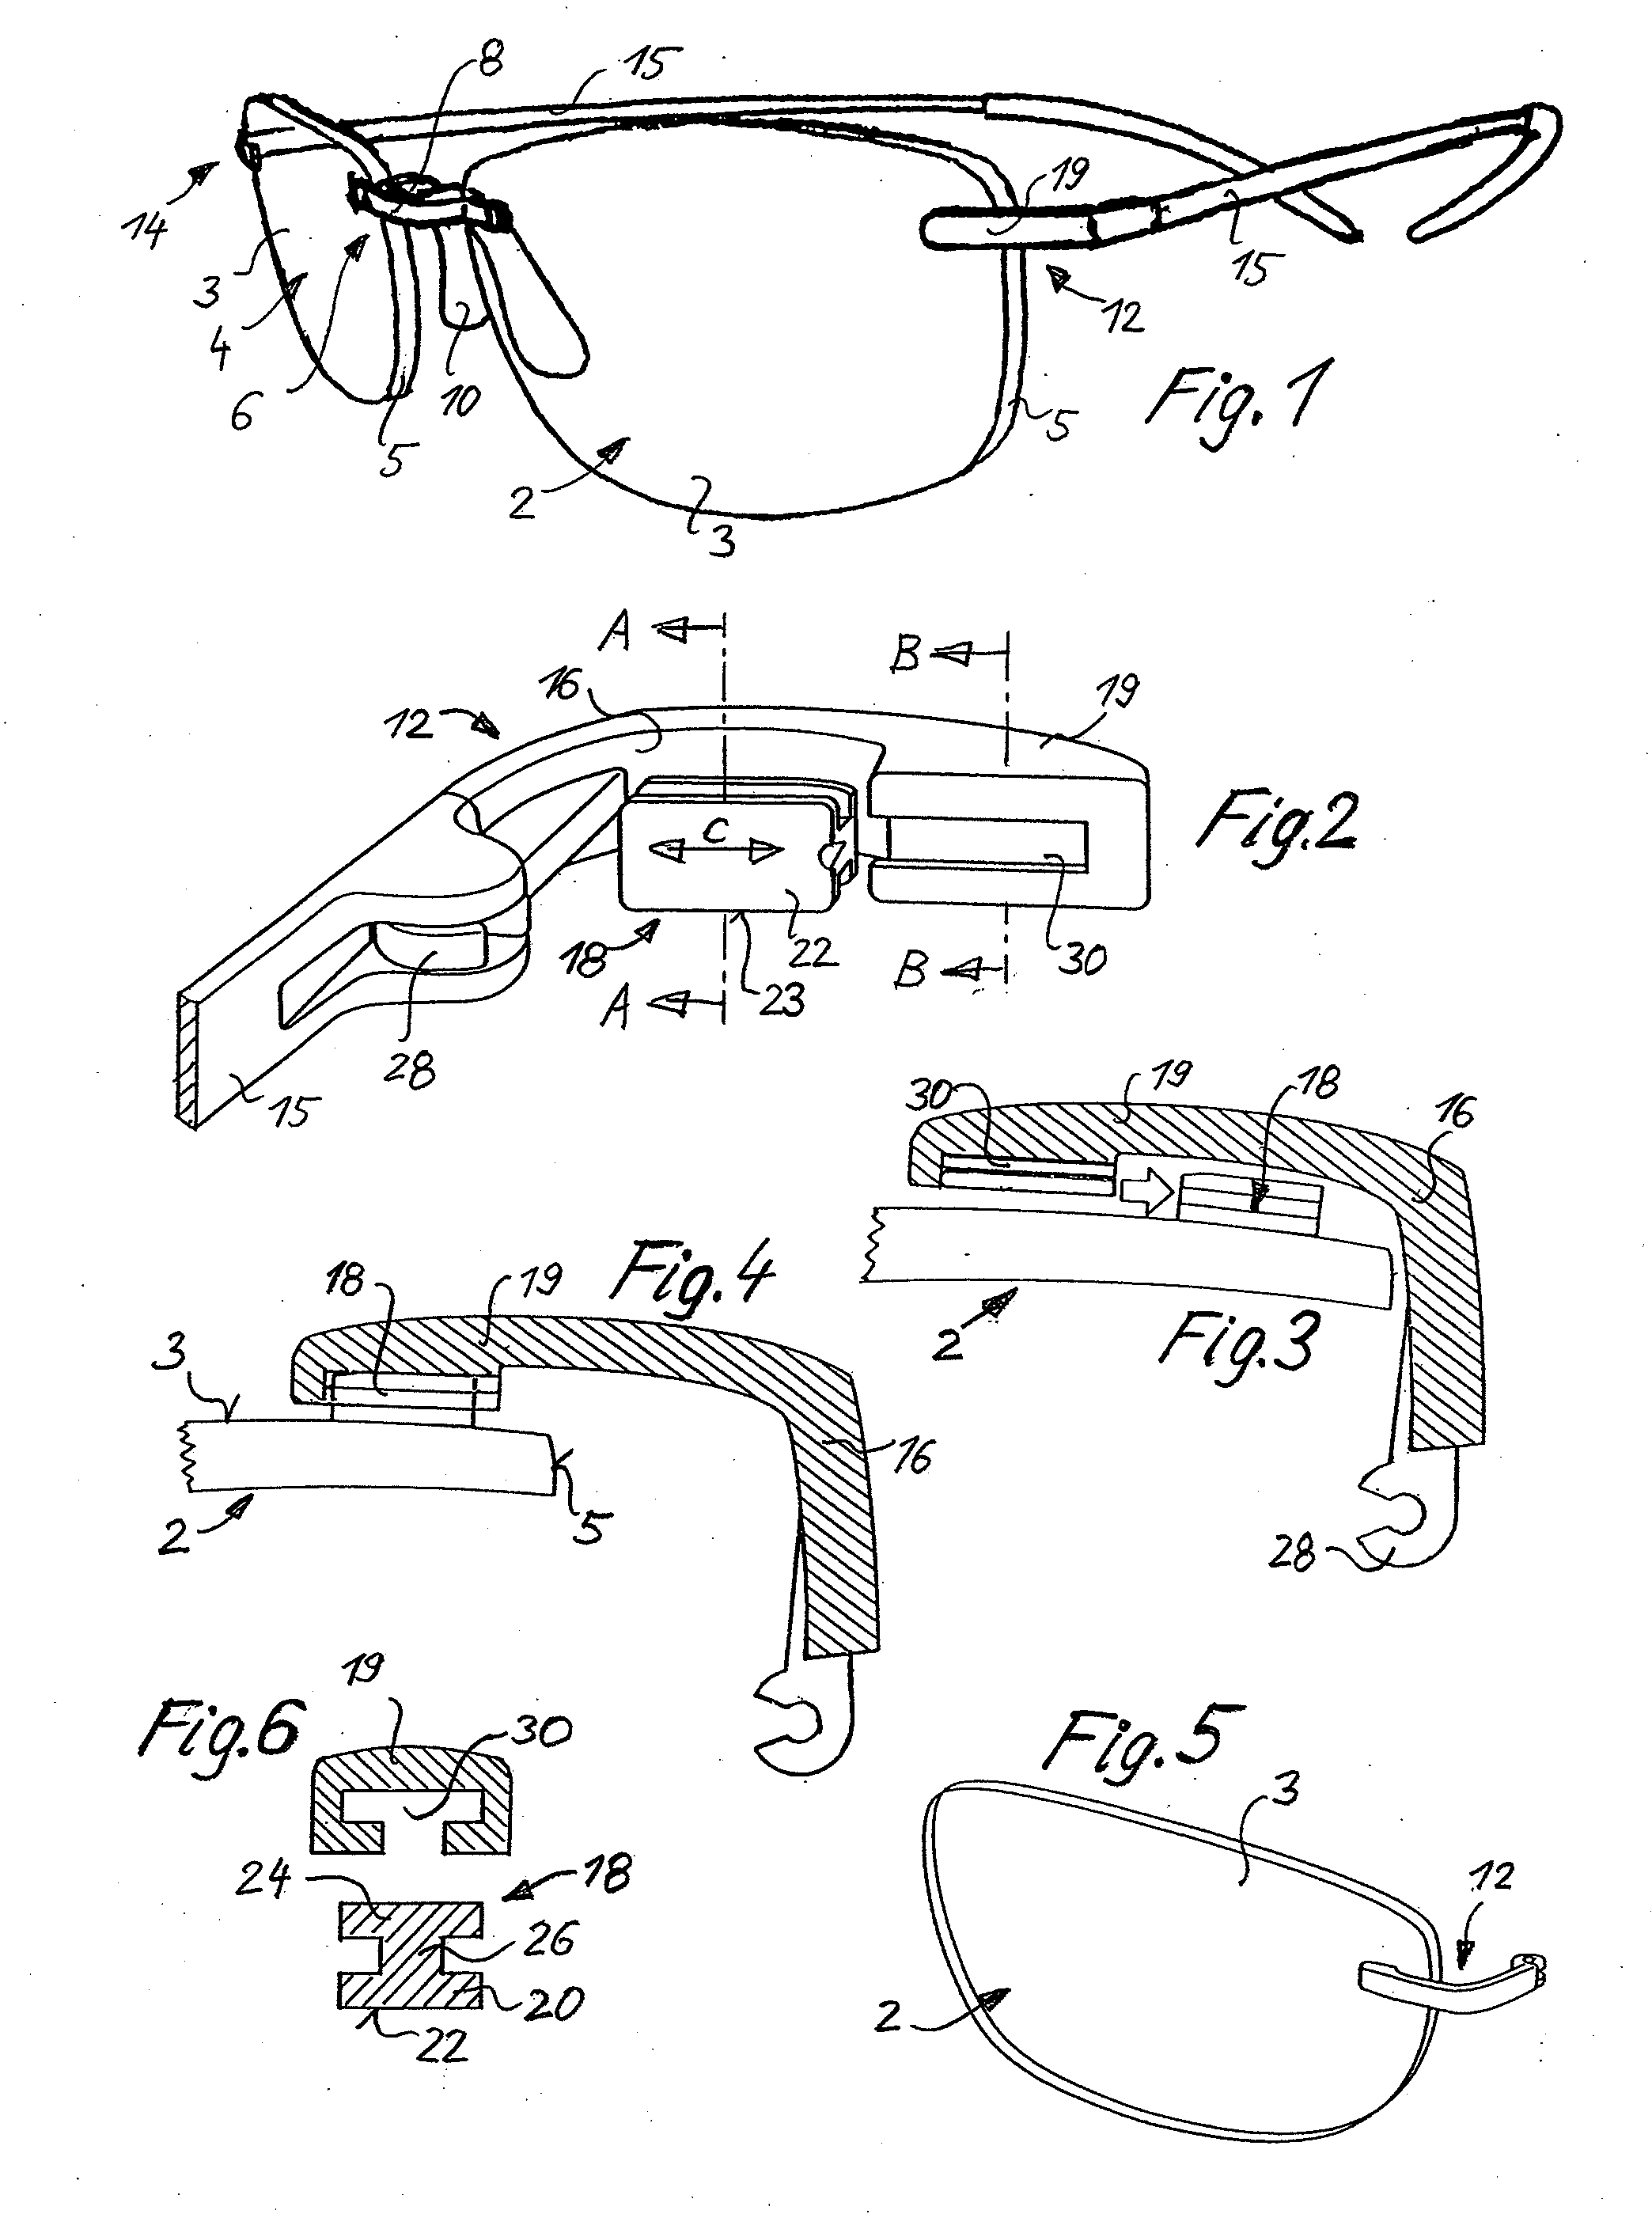 Method of Manufacturing Rimless Spectacles and a Mask Suited for Use with said Method